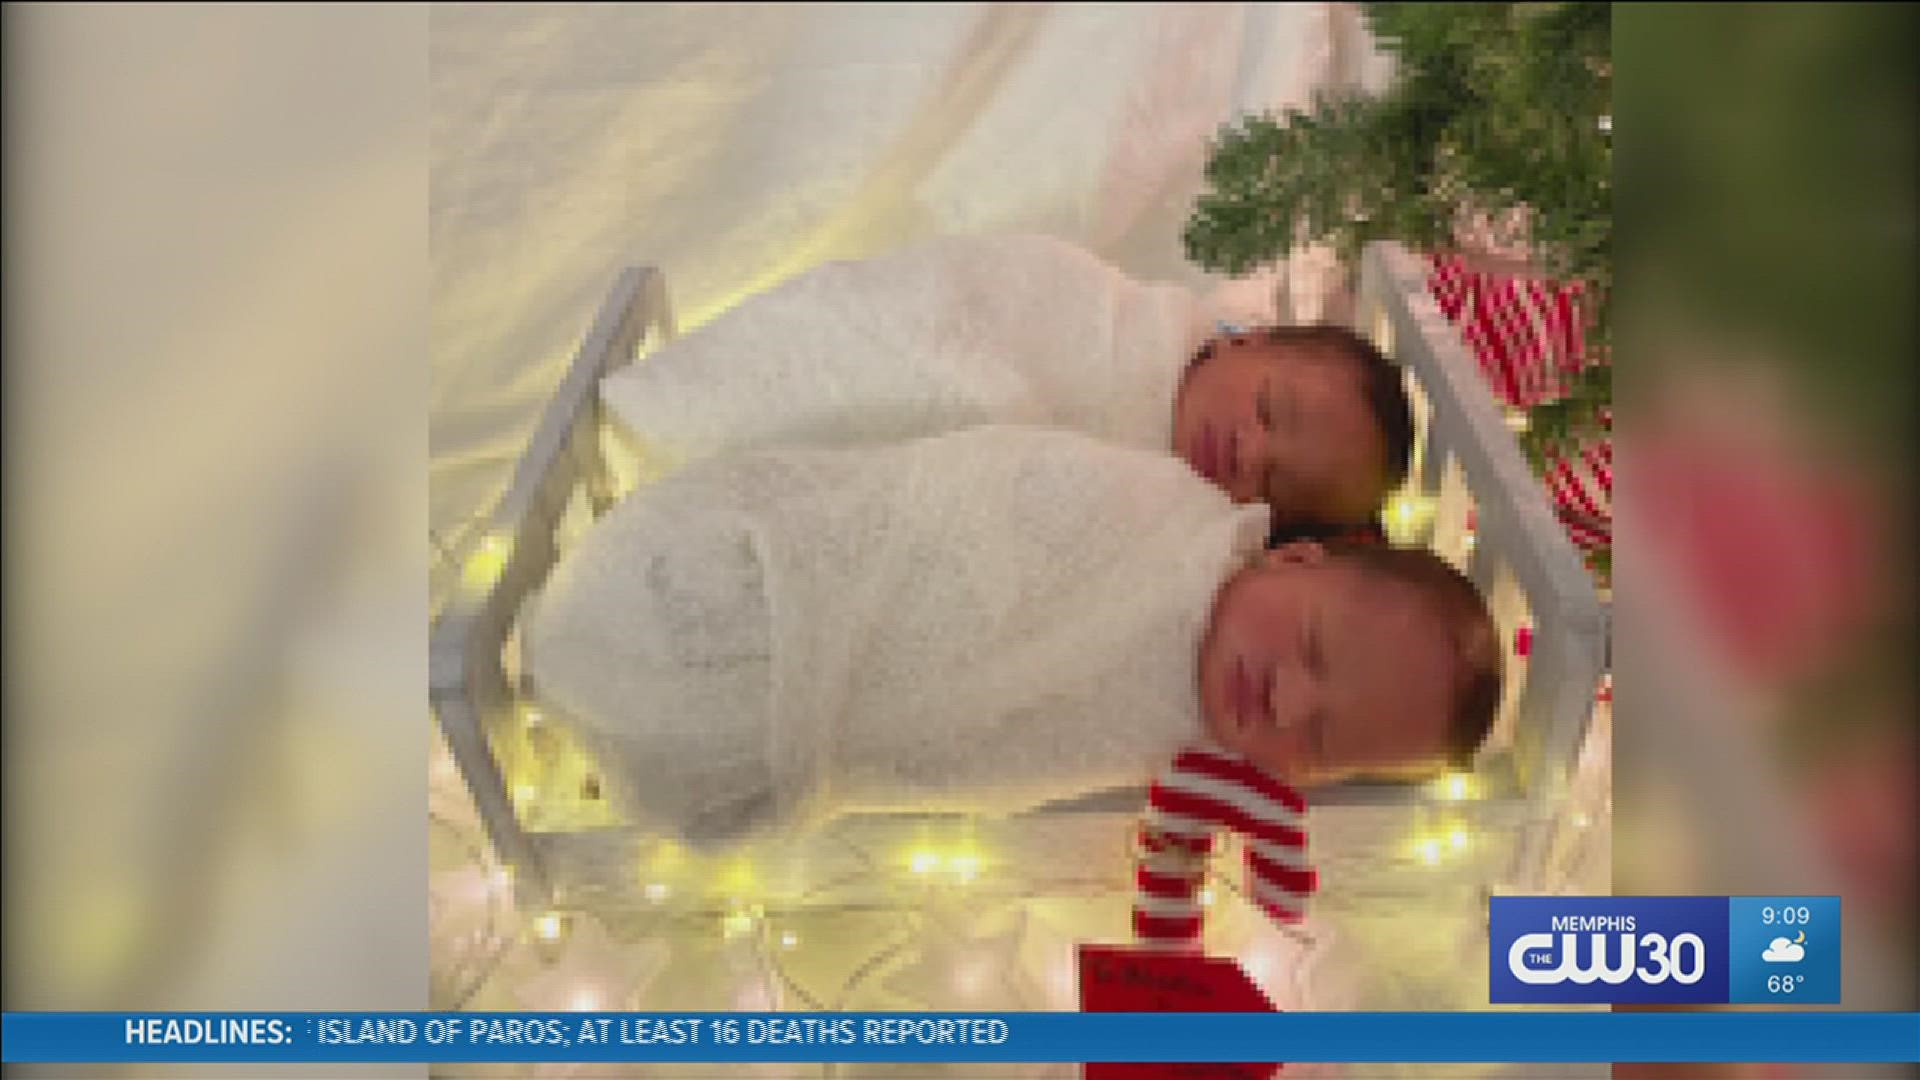 The nurses in the NICU department at St. Francis Hospital dressed up the babies in Christmas outfits in honor of the holiday.